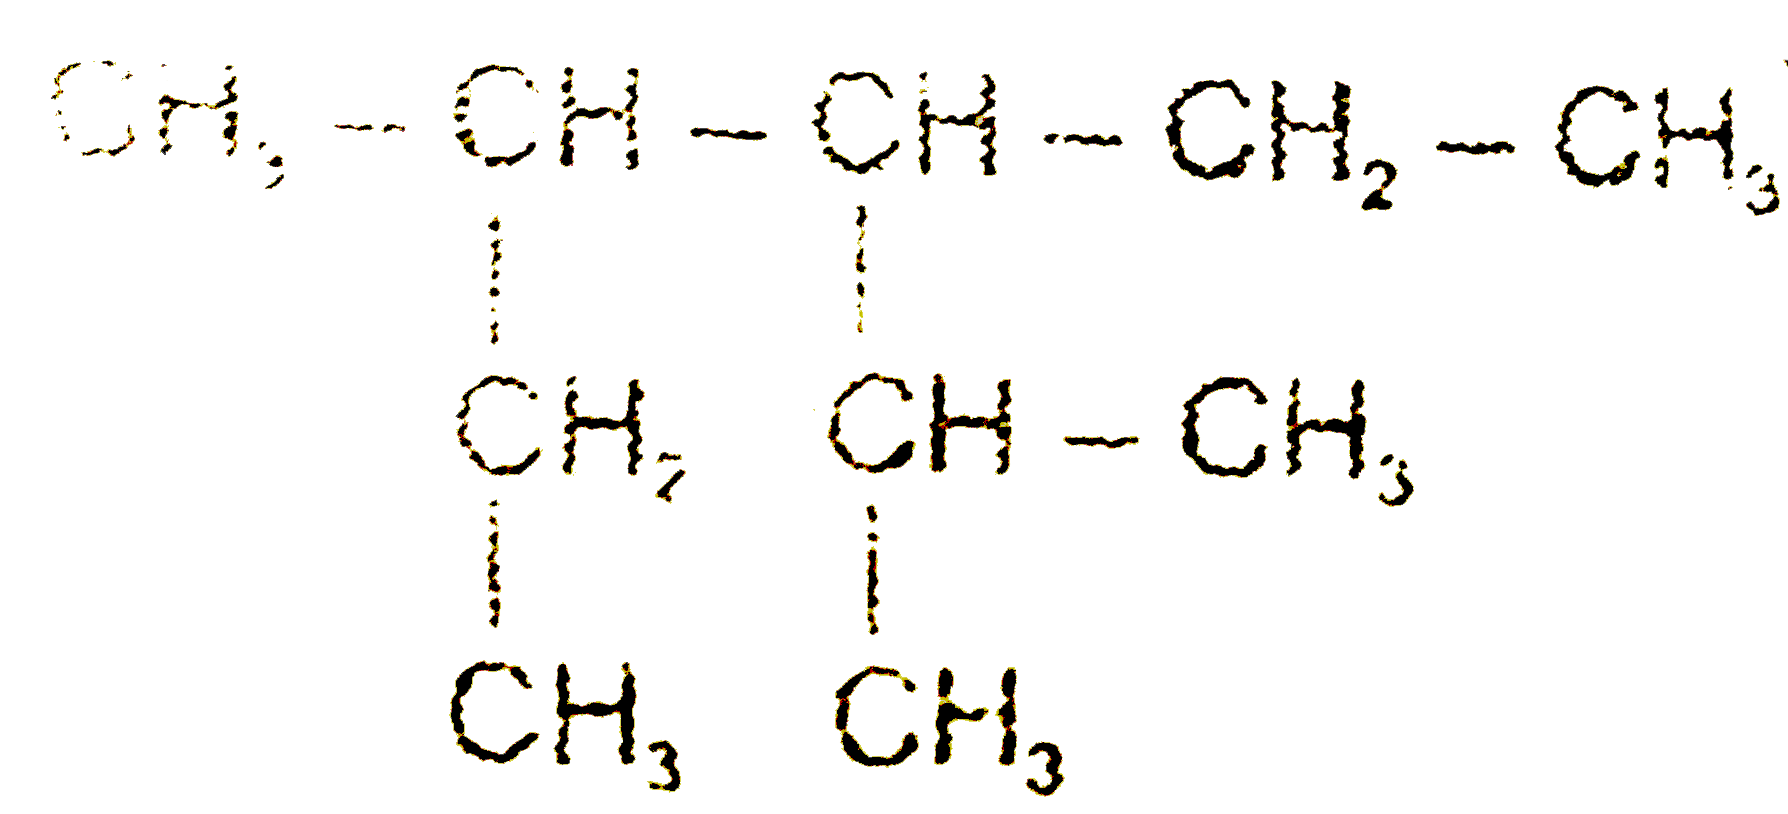 The correct IUPAC name os the following compound is